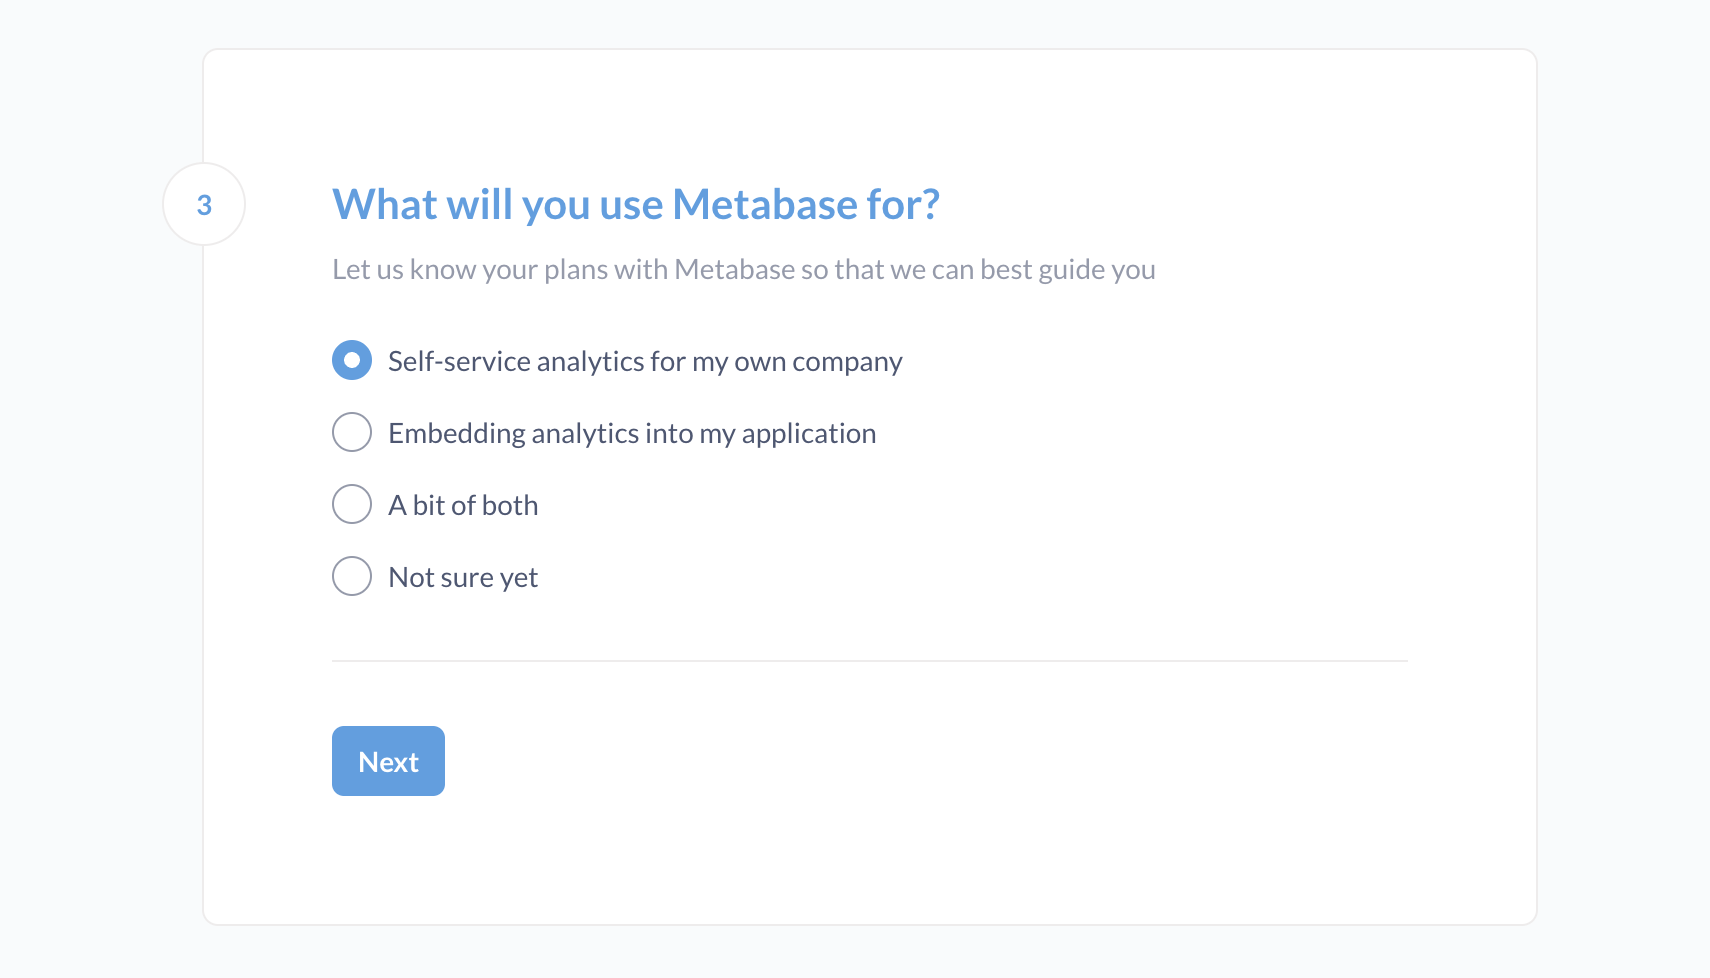 What will you use Metabase for?